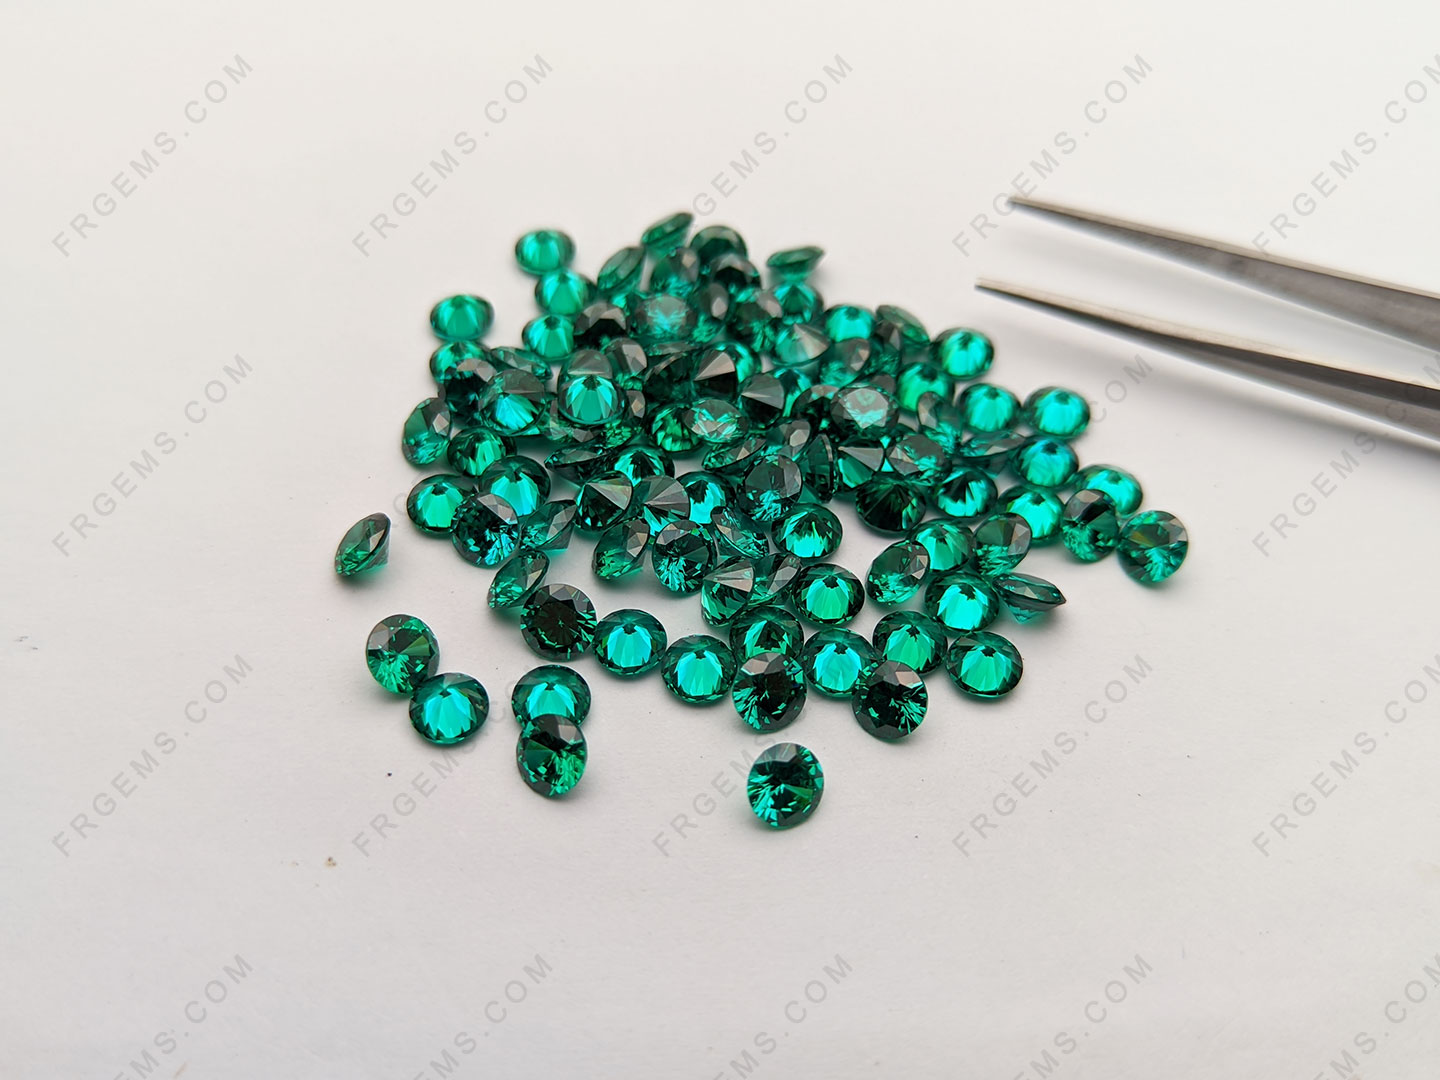 Cubic Zirconia CZ Teal Color Round Shaped Faceted cut 6mm gemstones wholesale